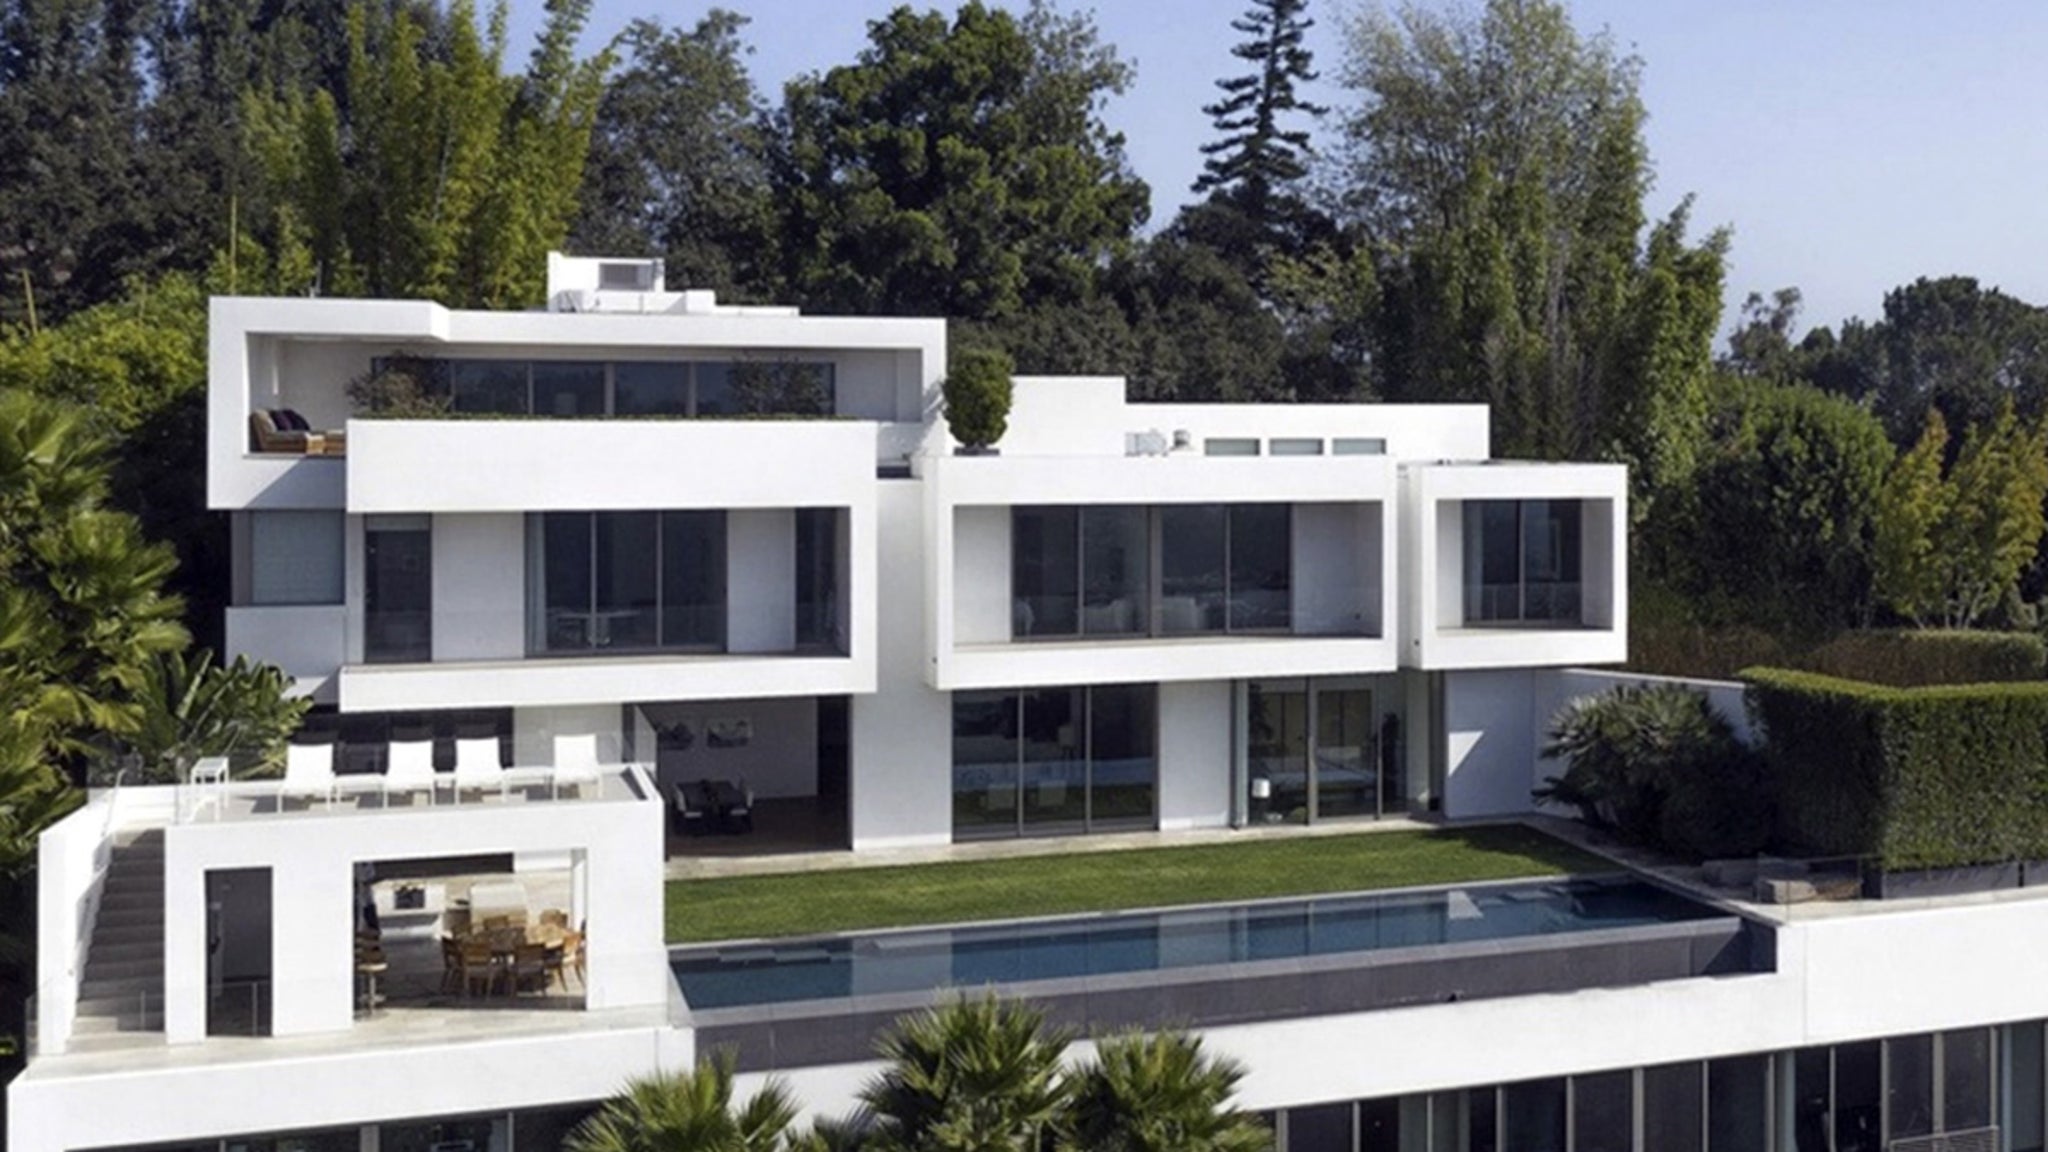 Bel-Air Mansion by Trevor Noah, $ 27.5 million, is a daily show palace